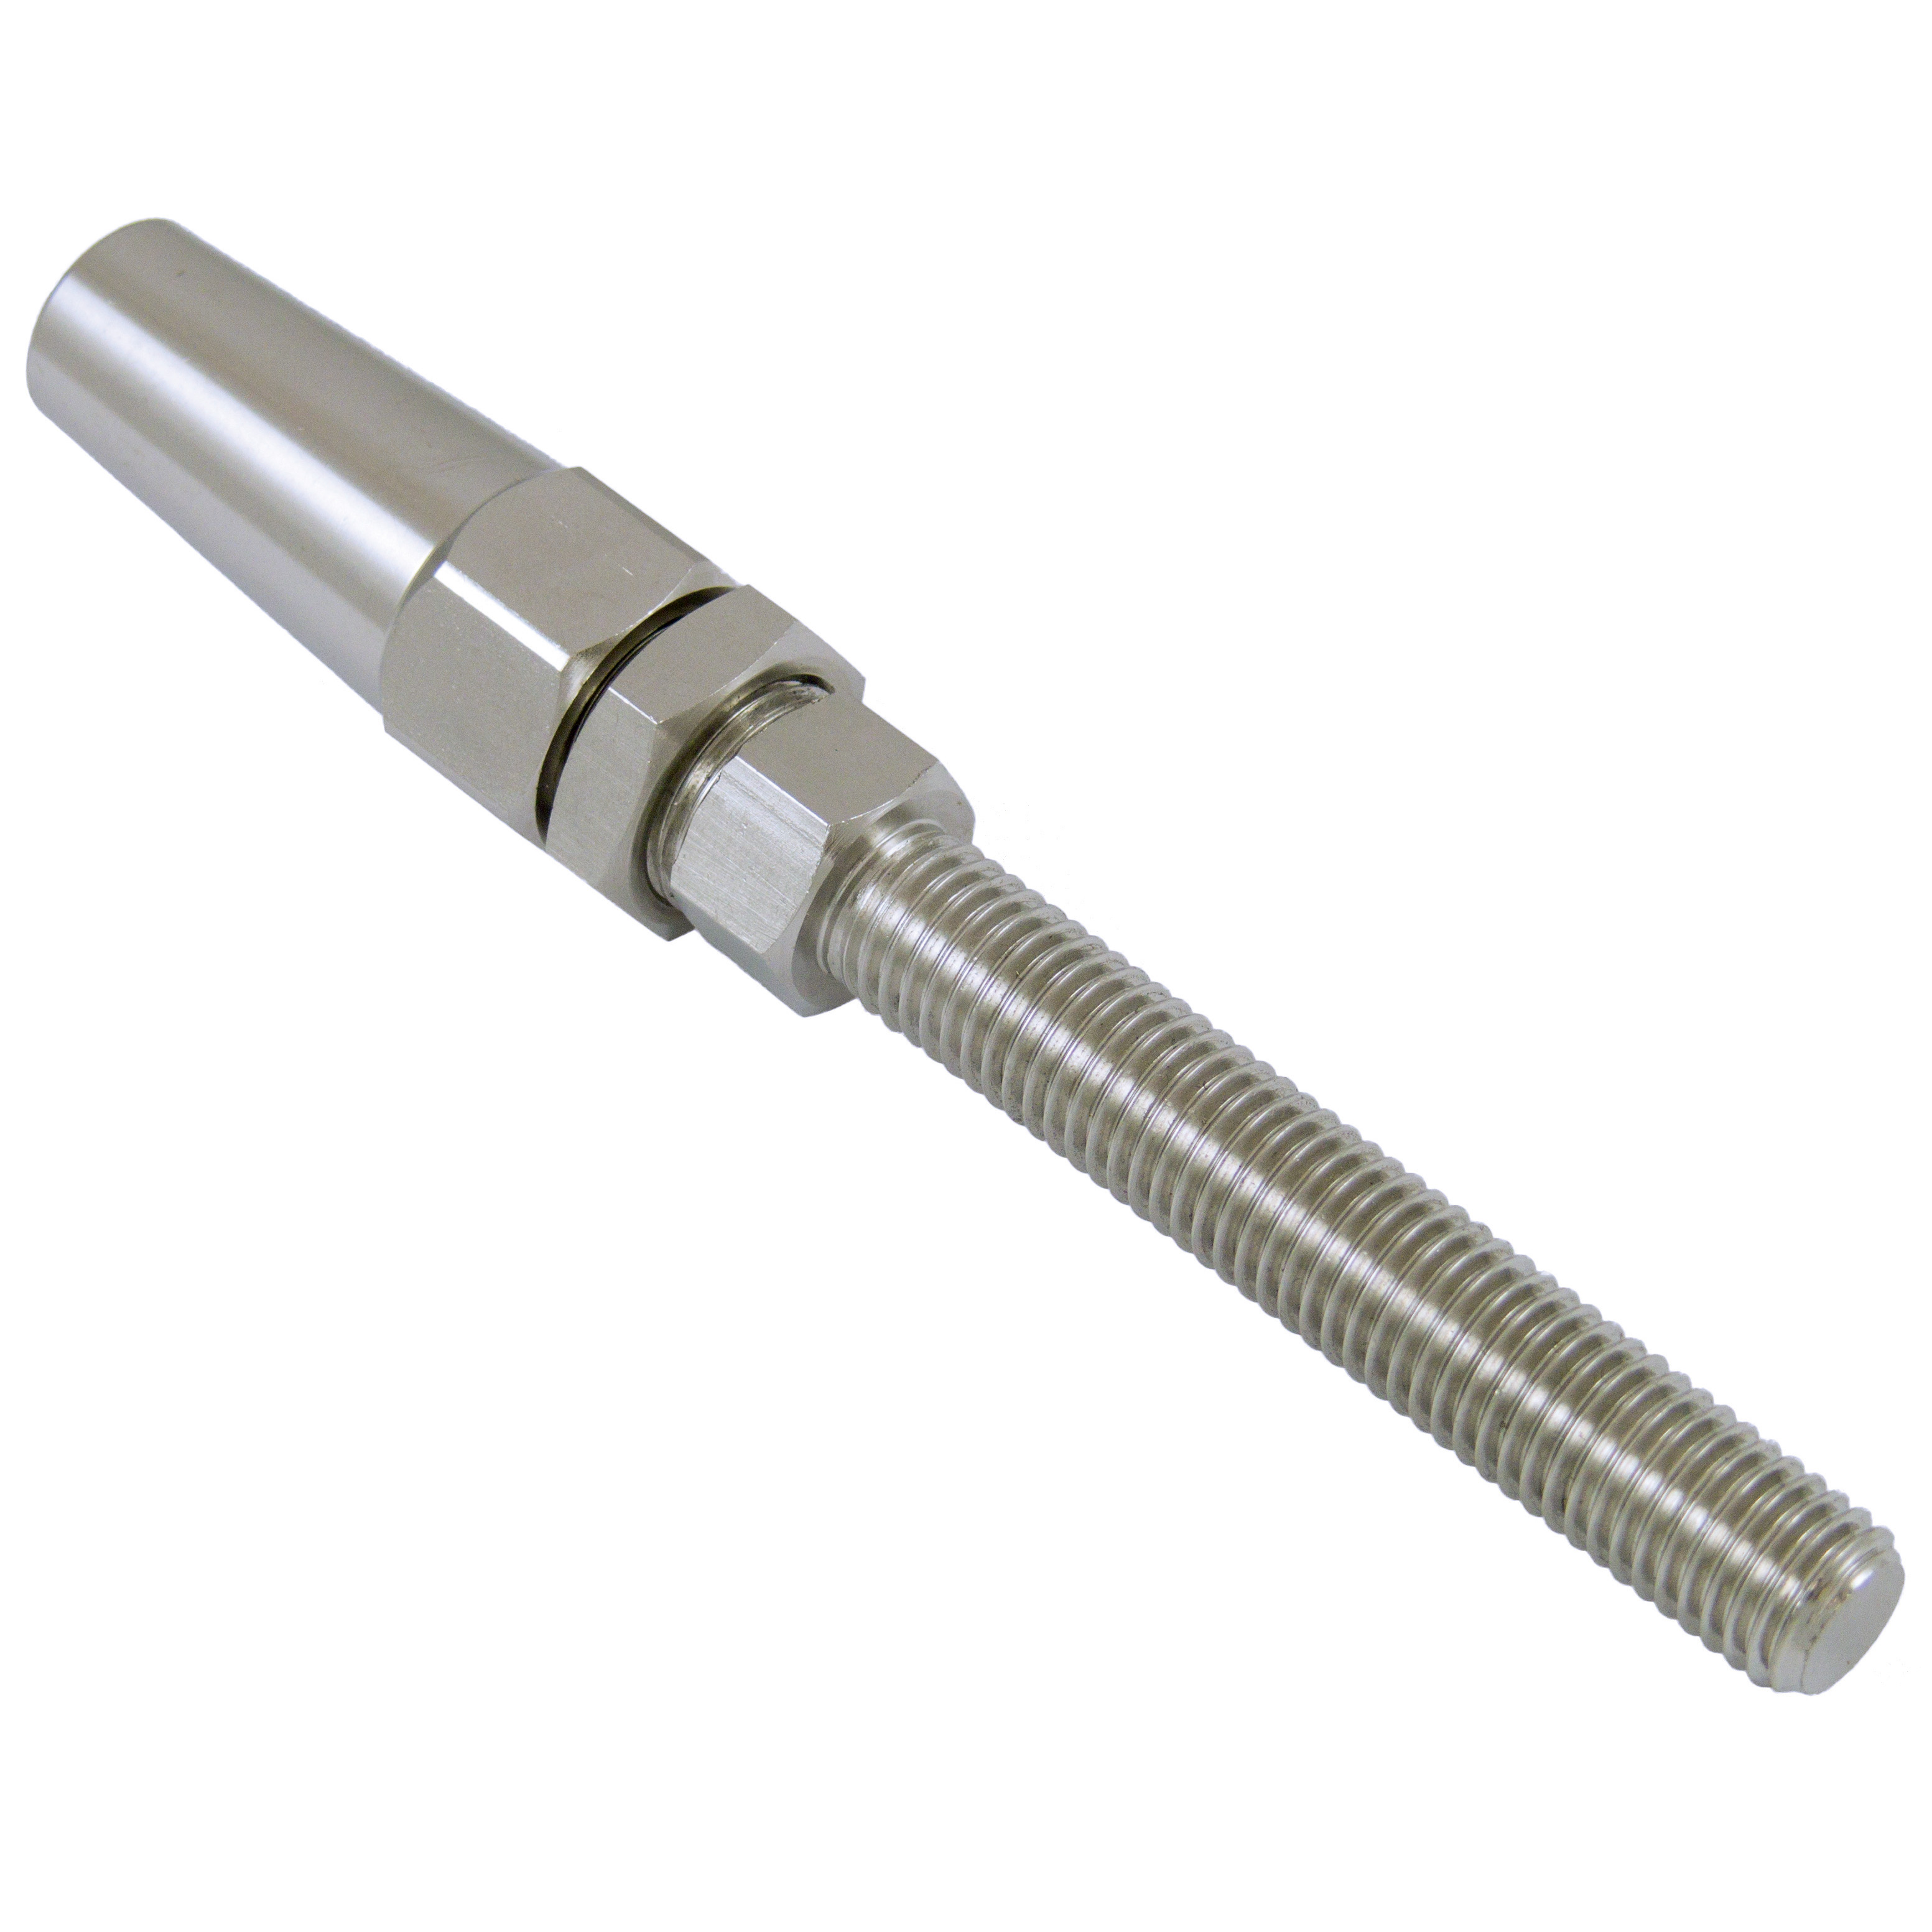 Quick fitting threaded cable terminal - Cable terminal with threaded end - Stainless steel - 